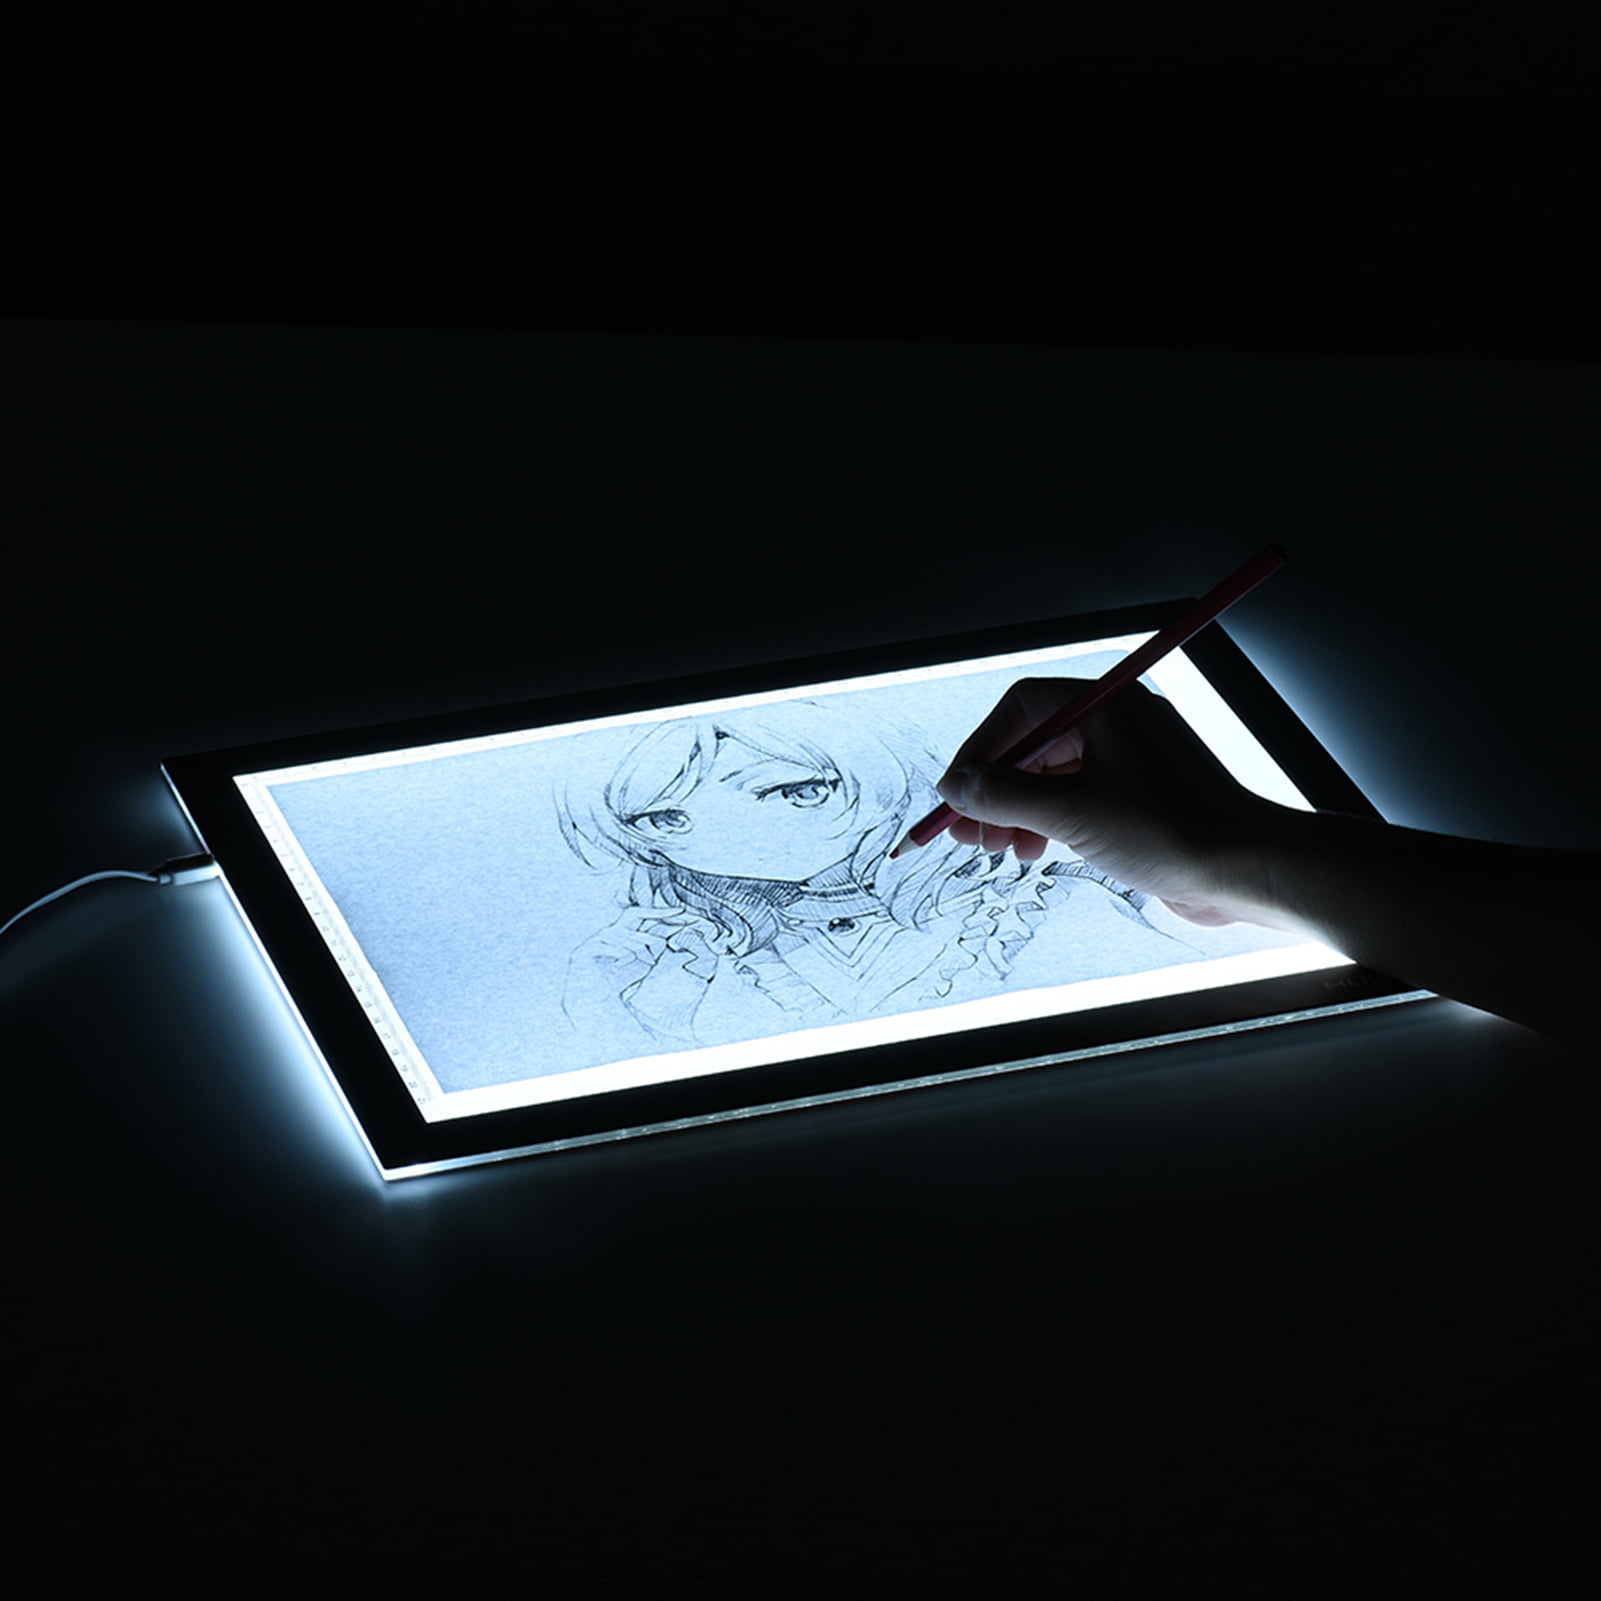 Huion L4S 15 A4 Size Ultra-thin Portable LED Light Pad Box Panel Table Copyboard Adjustable Illumination USB Powered for Cartoon Tattoo Tracing Pencil Drawing